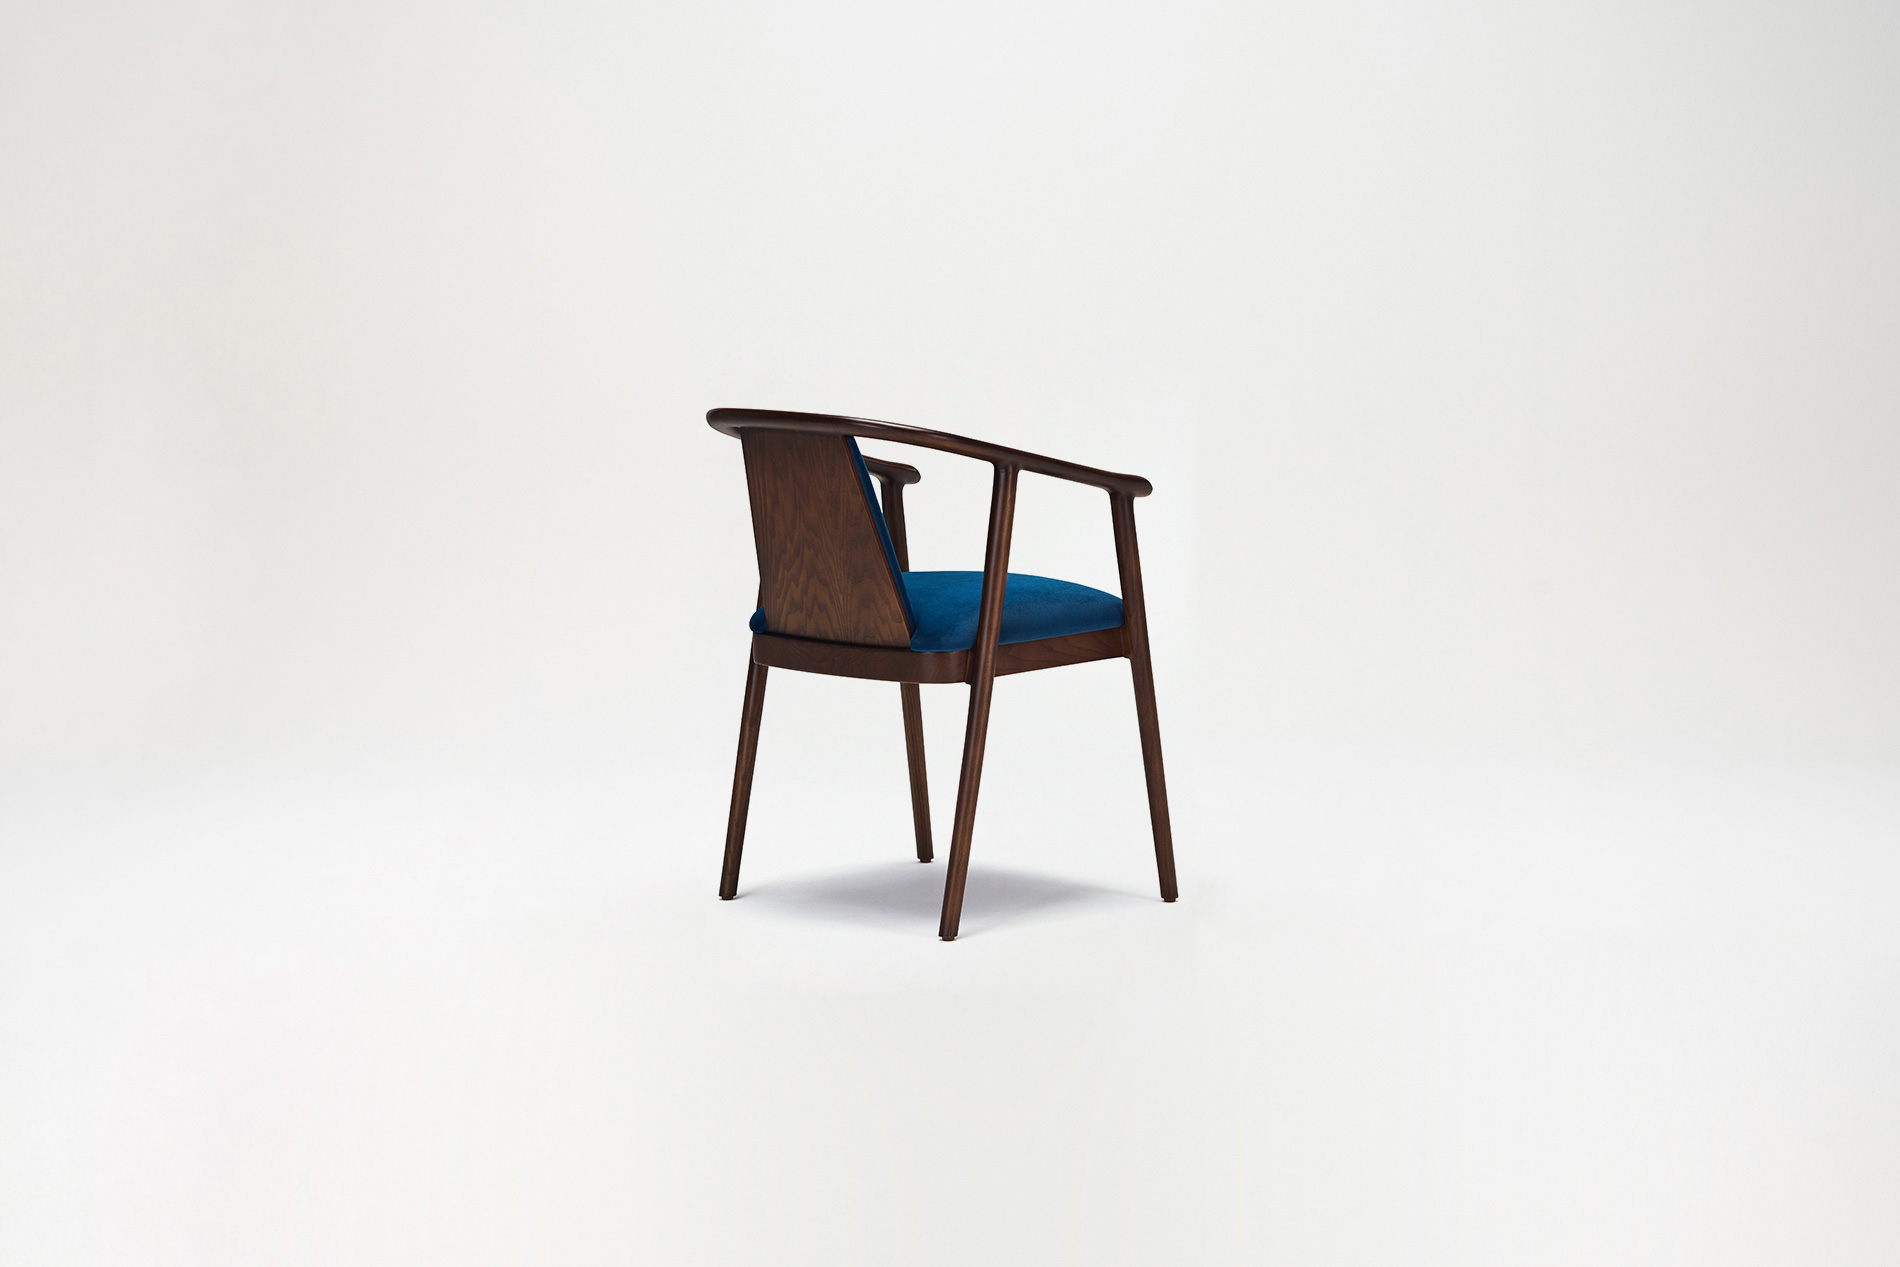 Aliah is a progressive and dynamic dining chair family, with and without arms.ALIAH KOLTUK